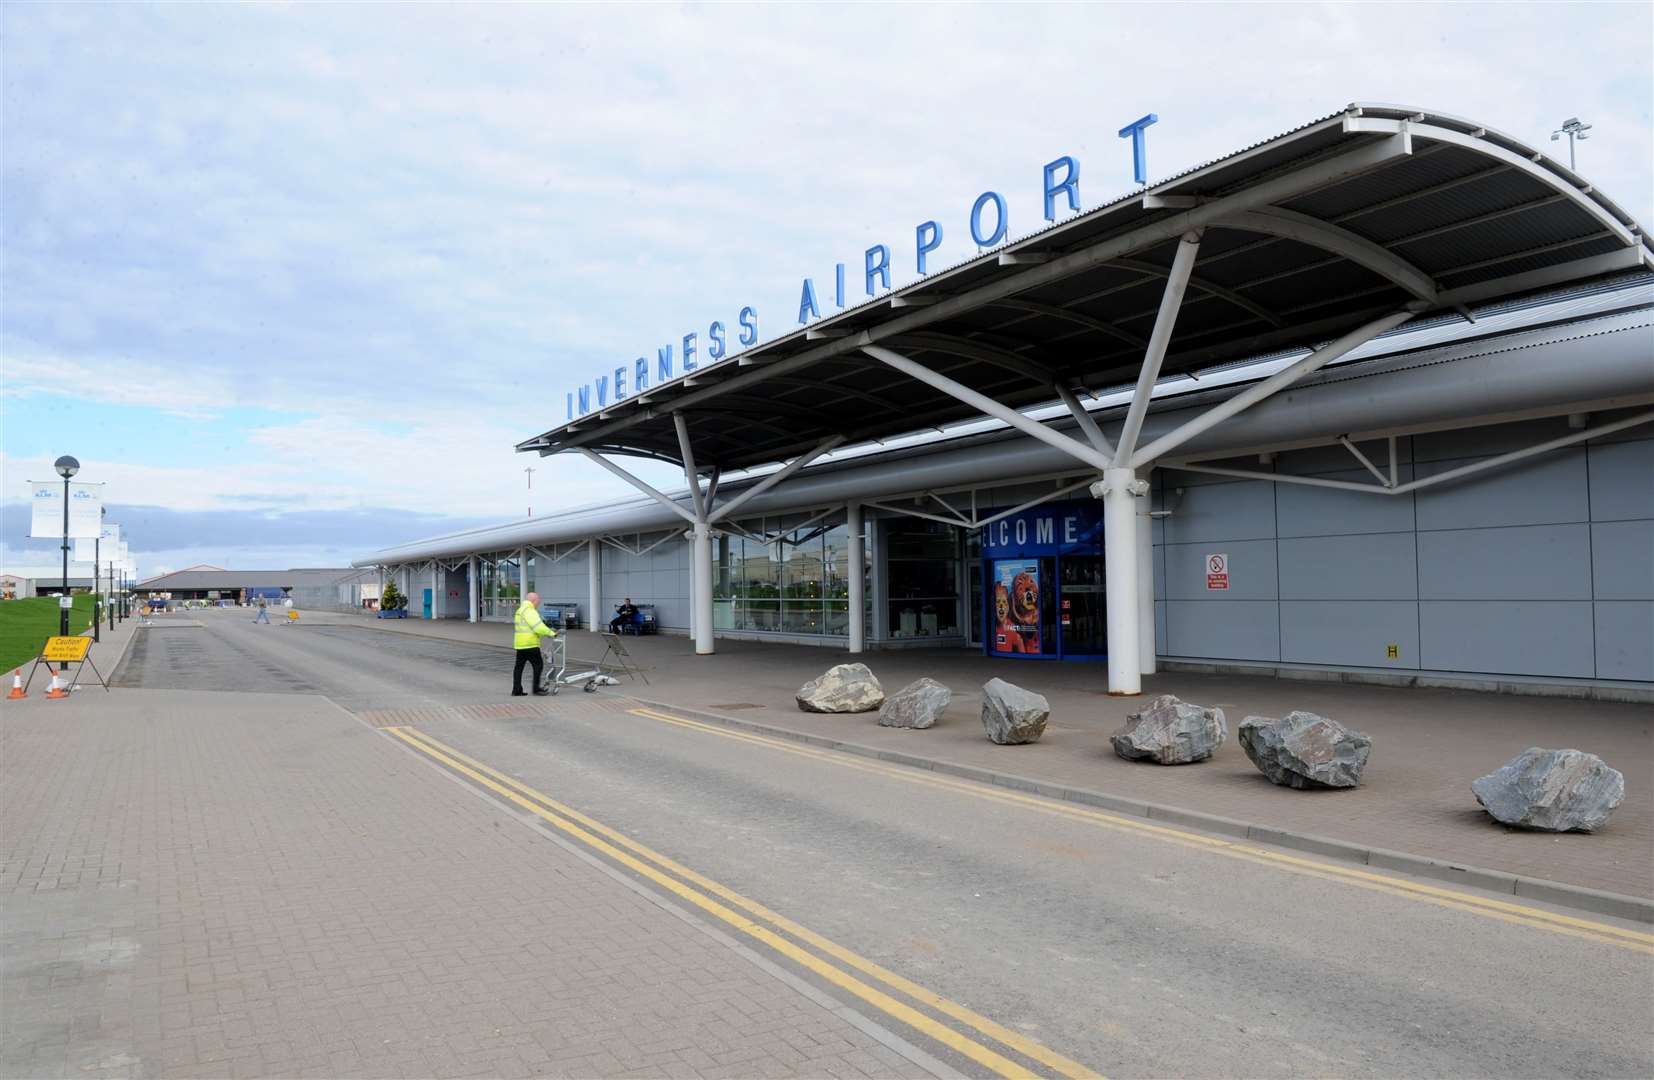 Hial, which owns Inverness Airport, wants to move forward with plans to centralise air traffic control services.